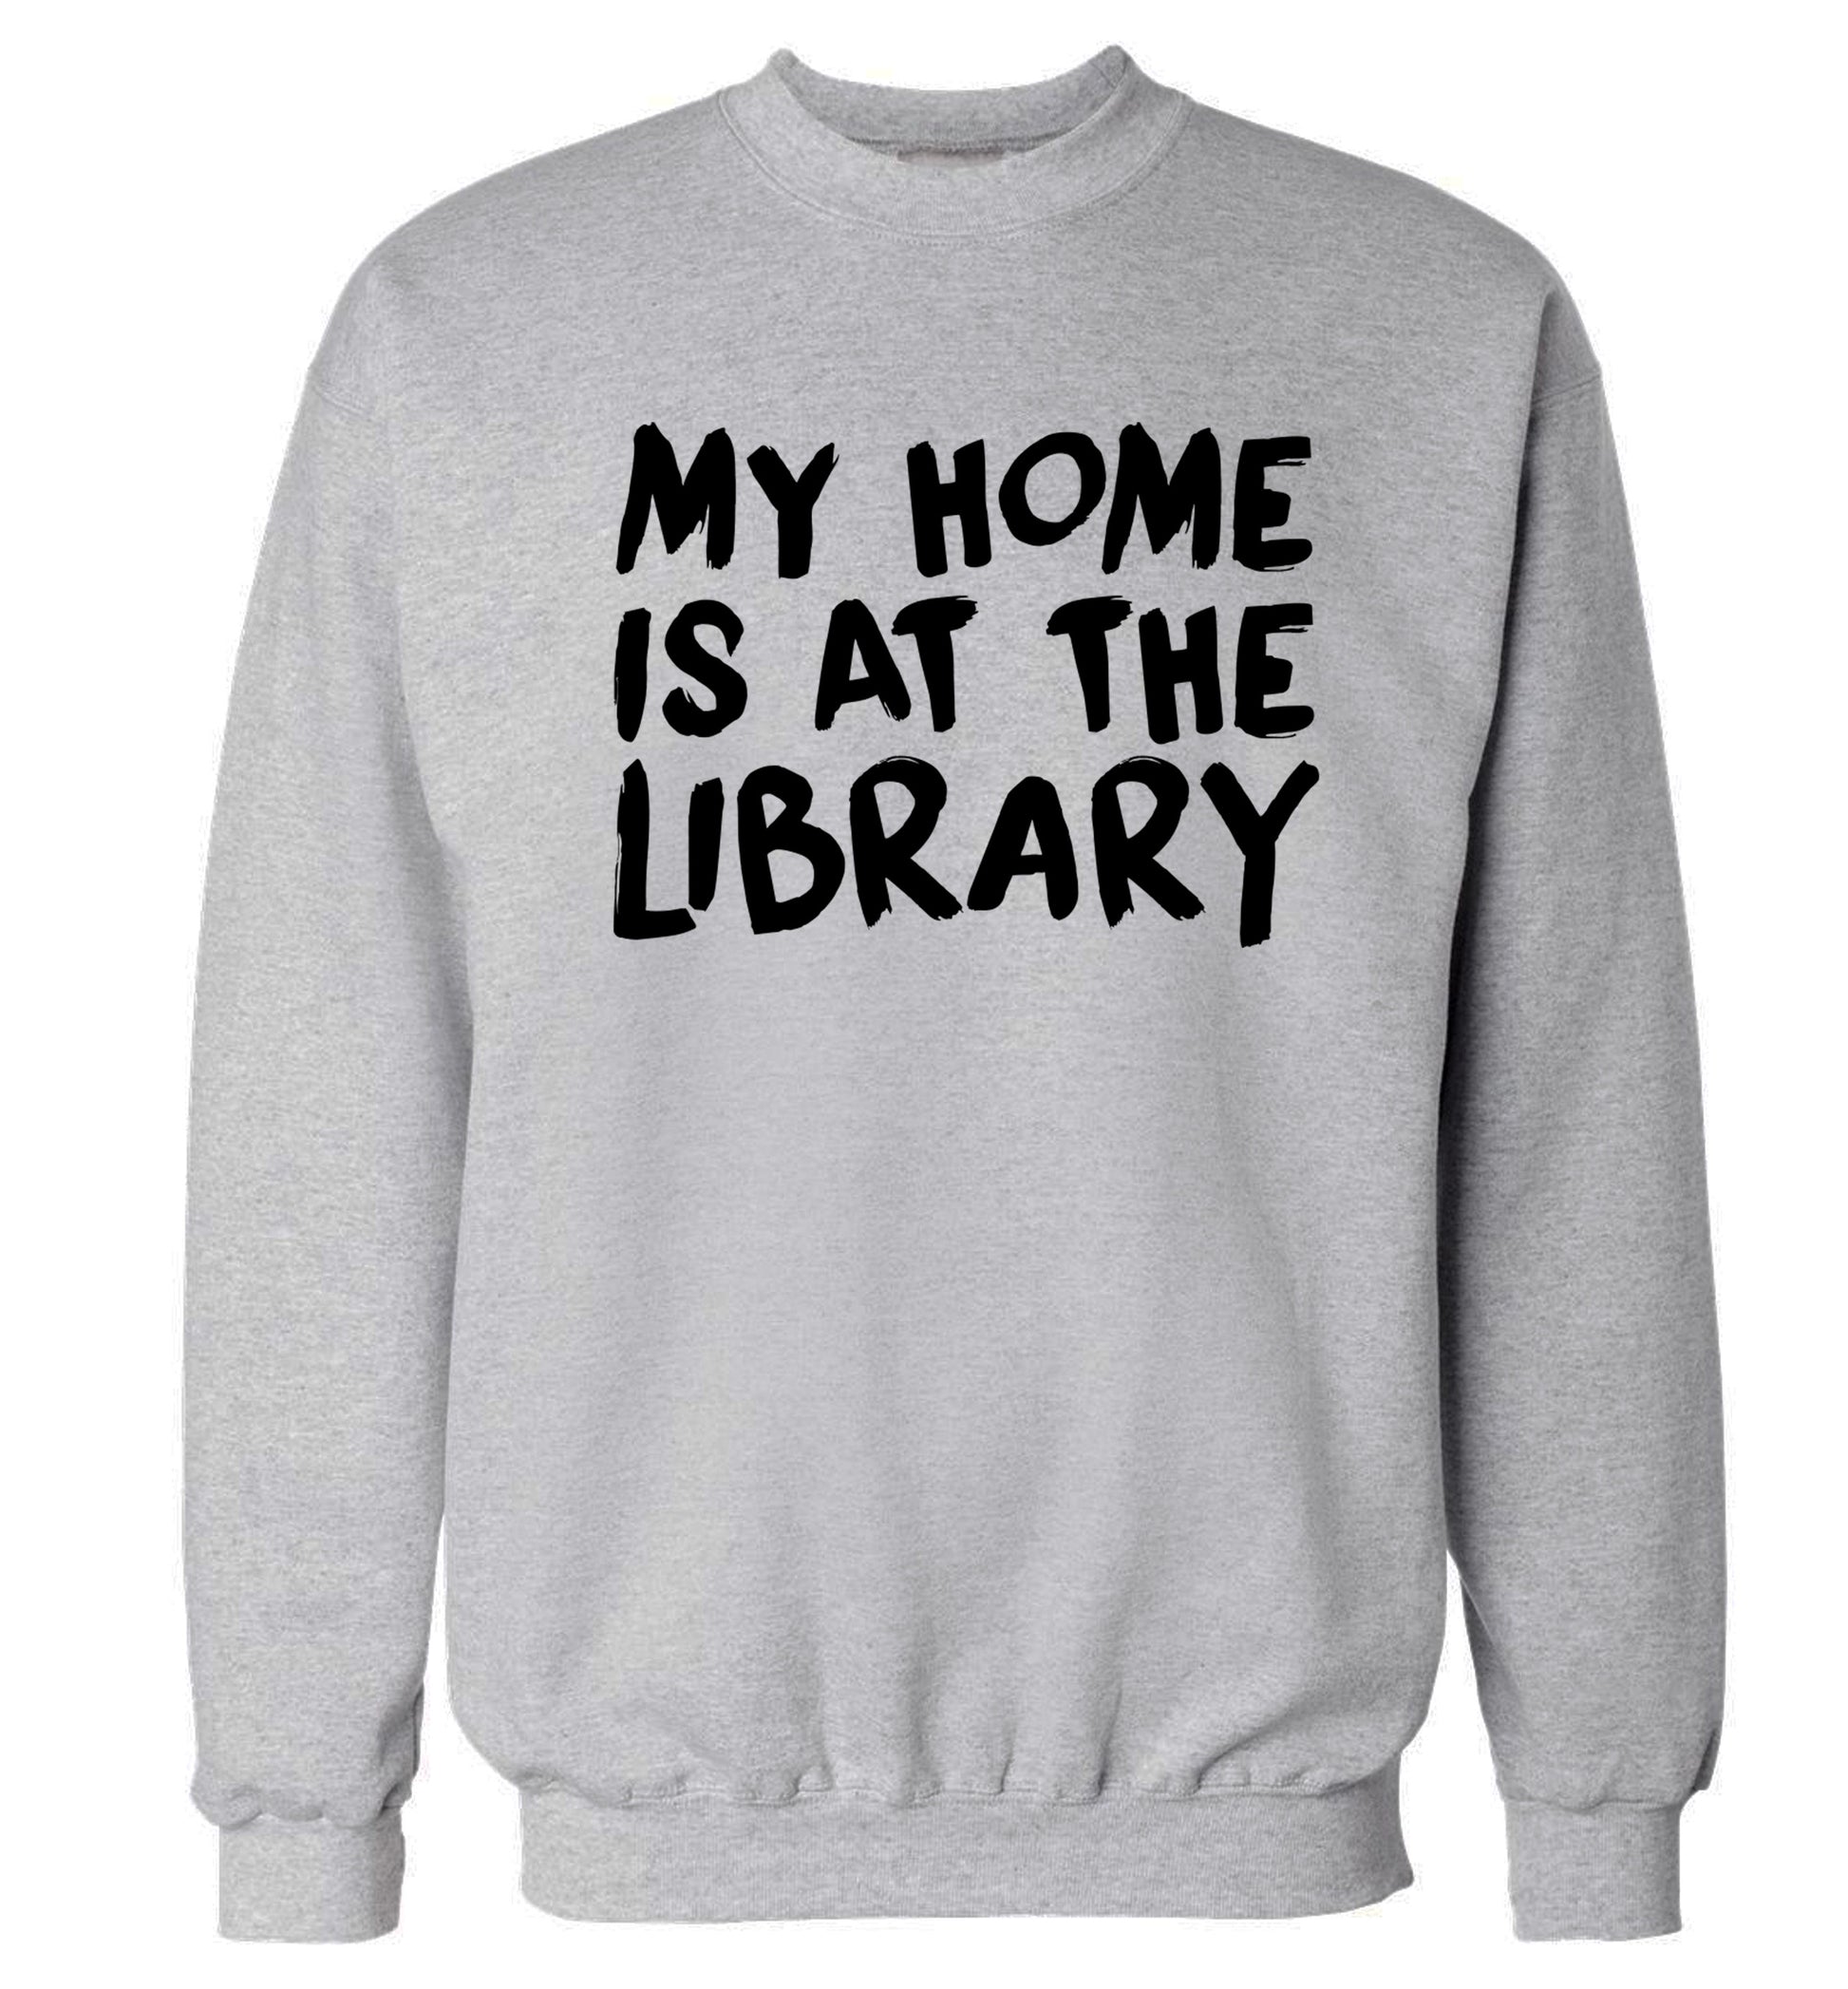 My home is at the library Adult's unisex grey Sweater 2XL